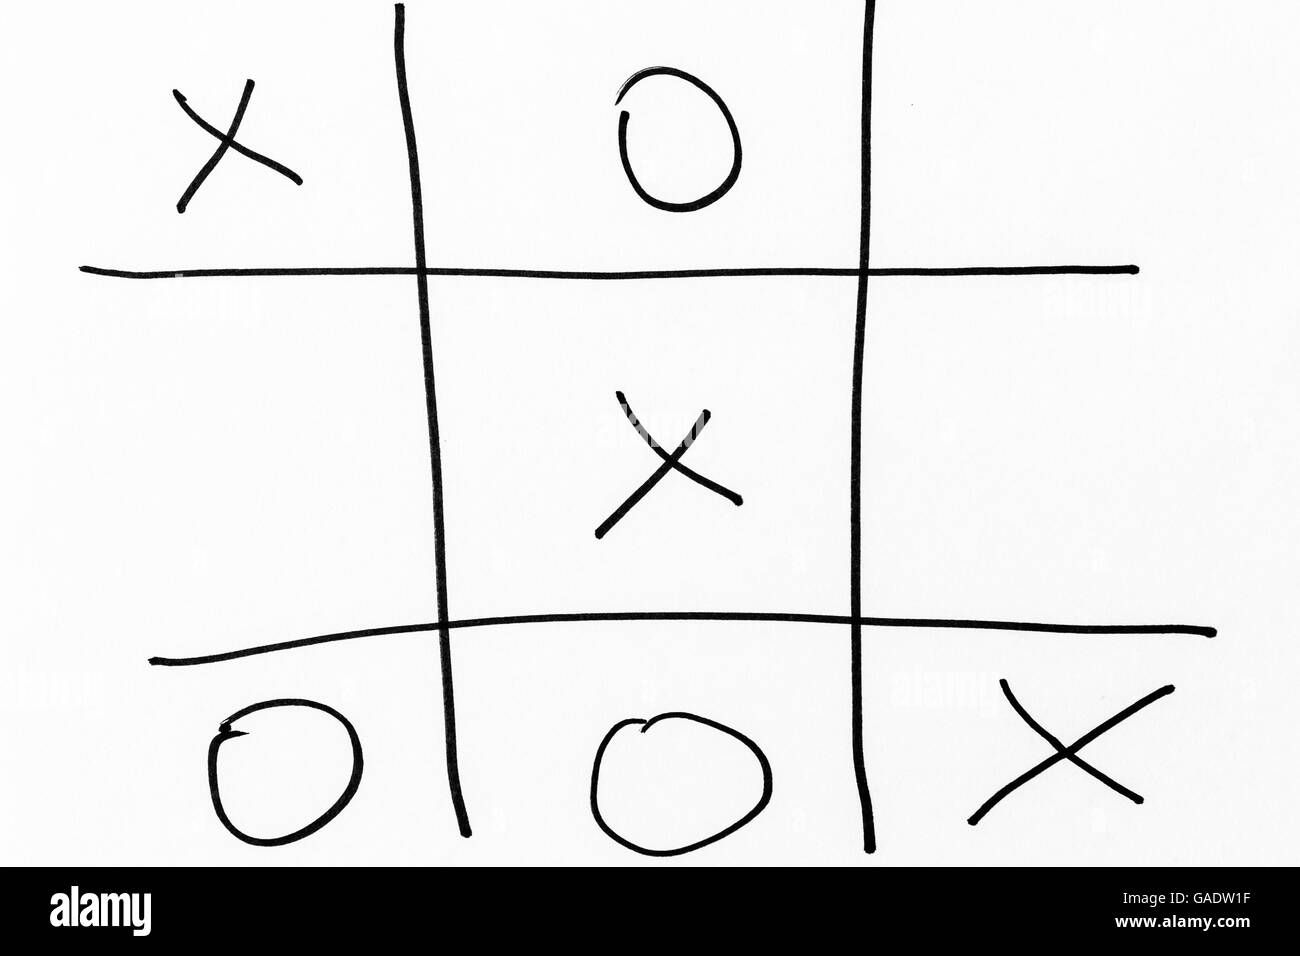 A hand drawn tic-tac-toe game  grid Stock Photo